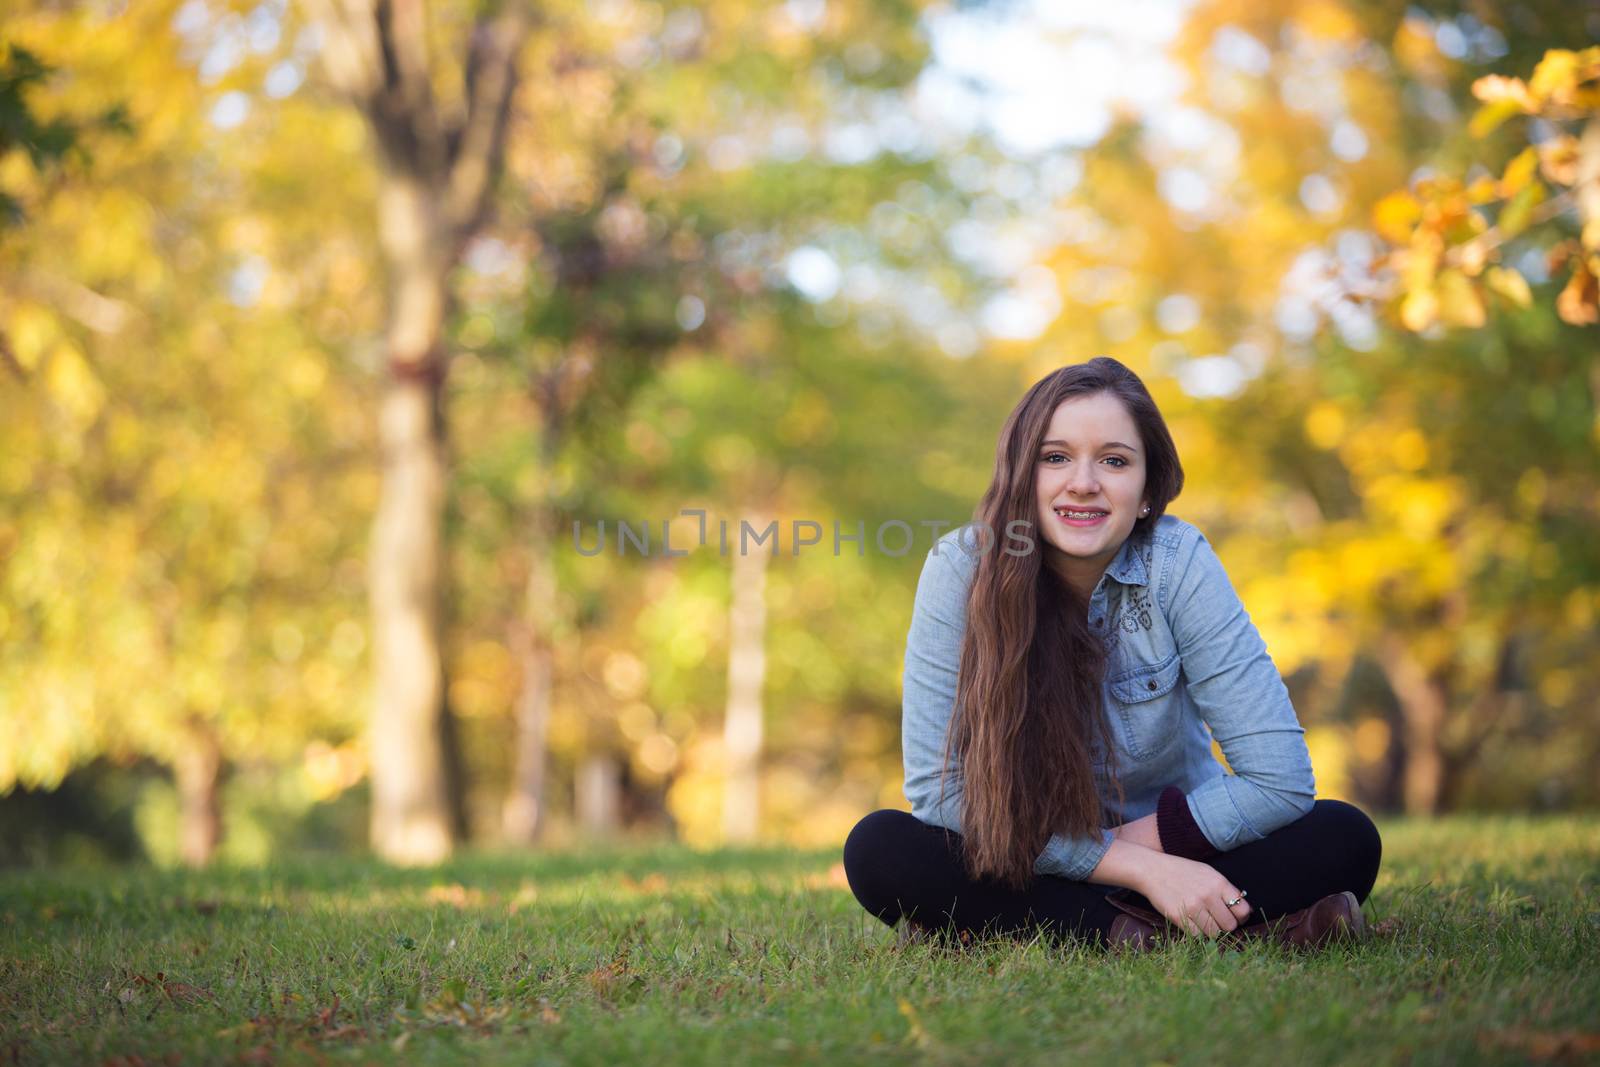 Cheerful single female teenager sitting outdoors on grass